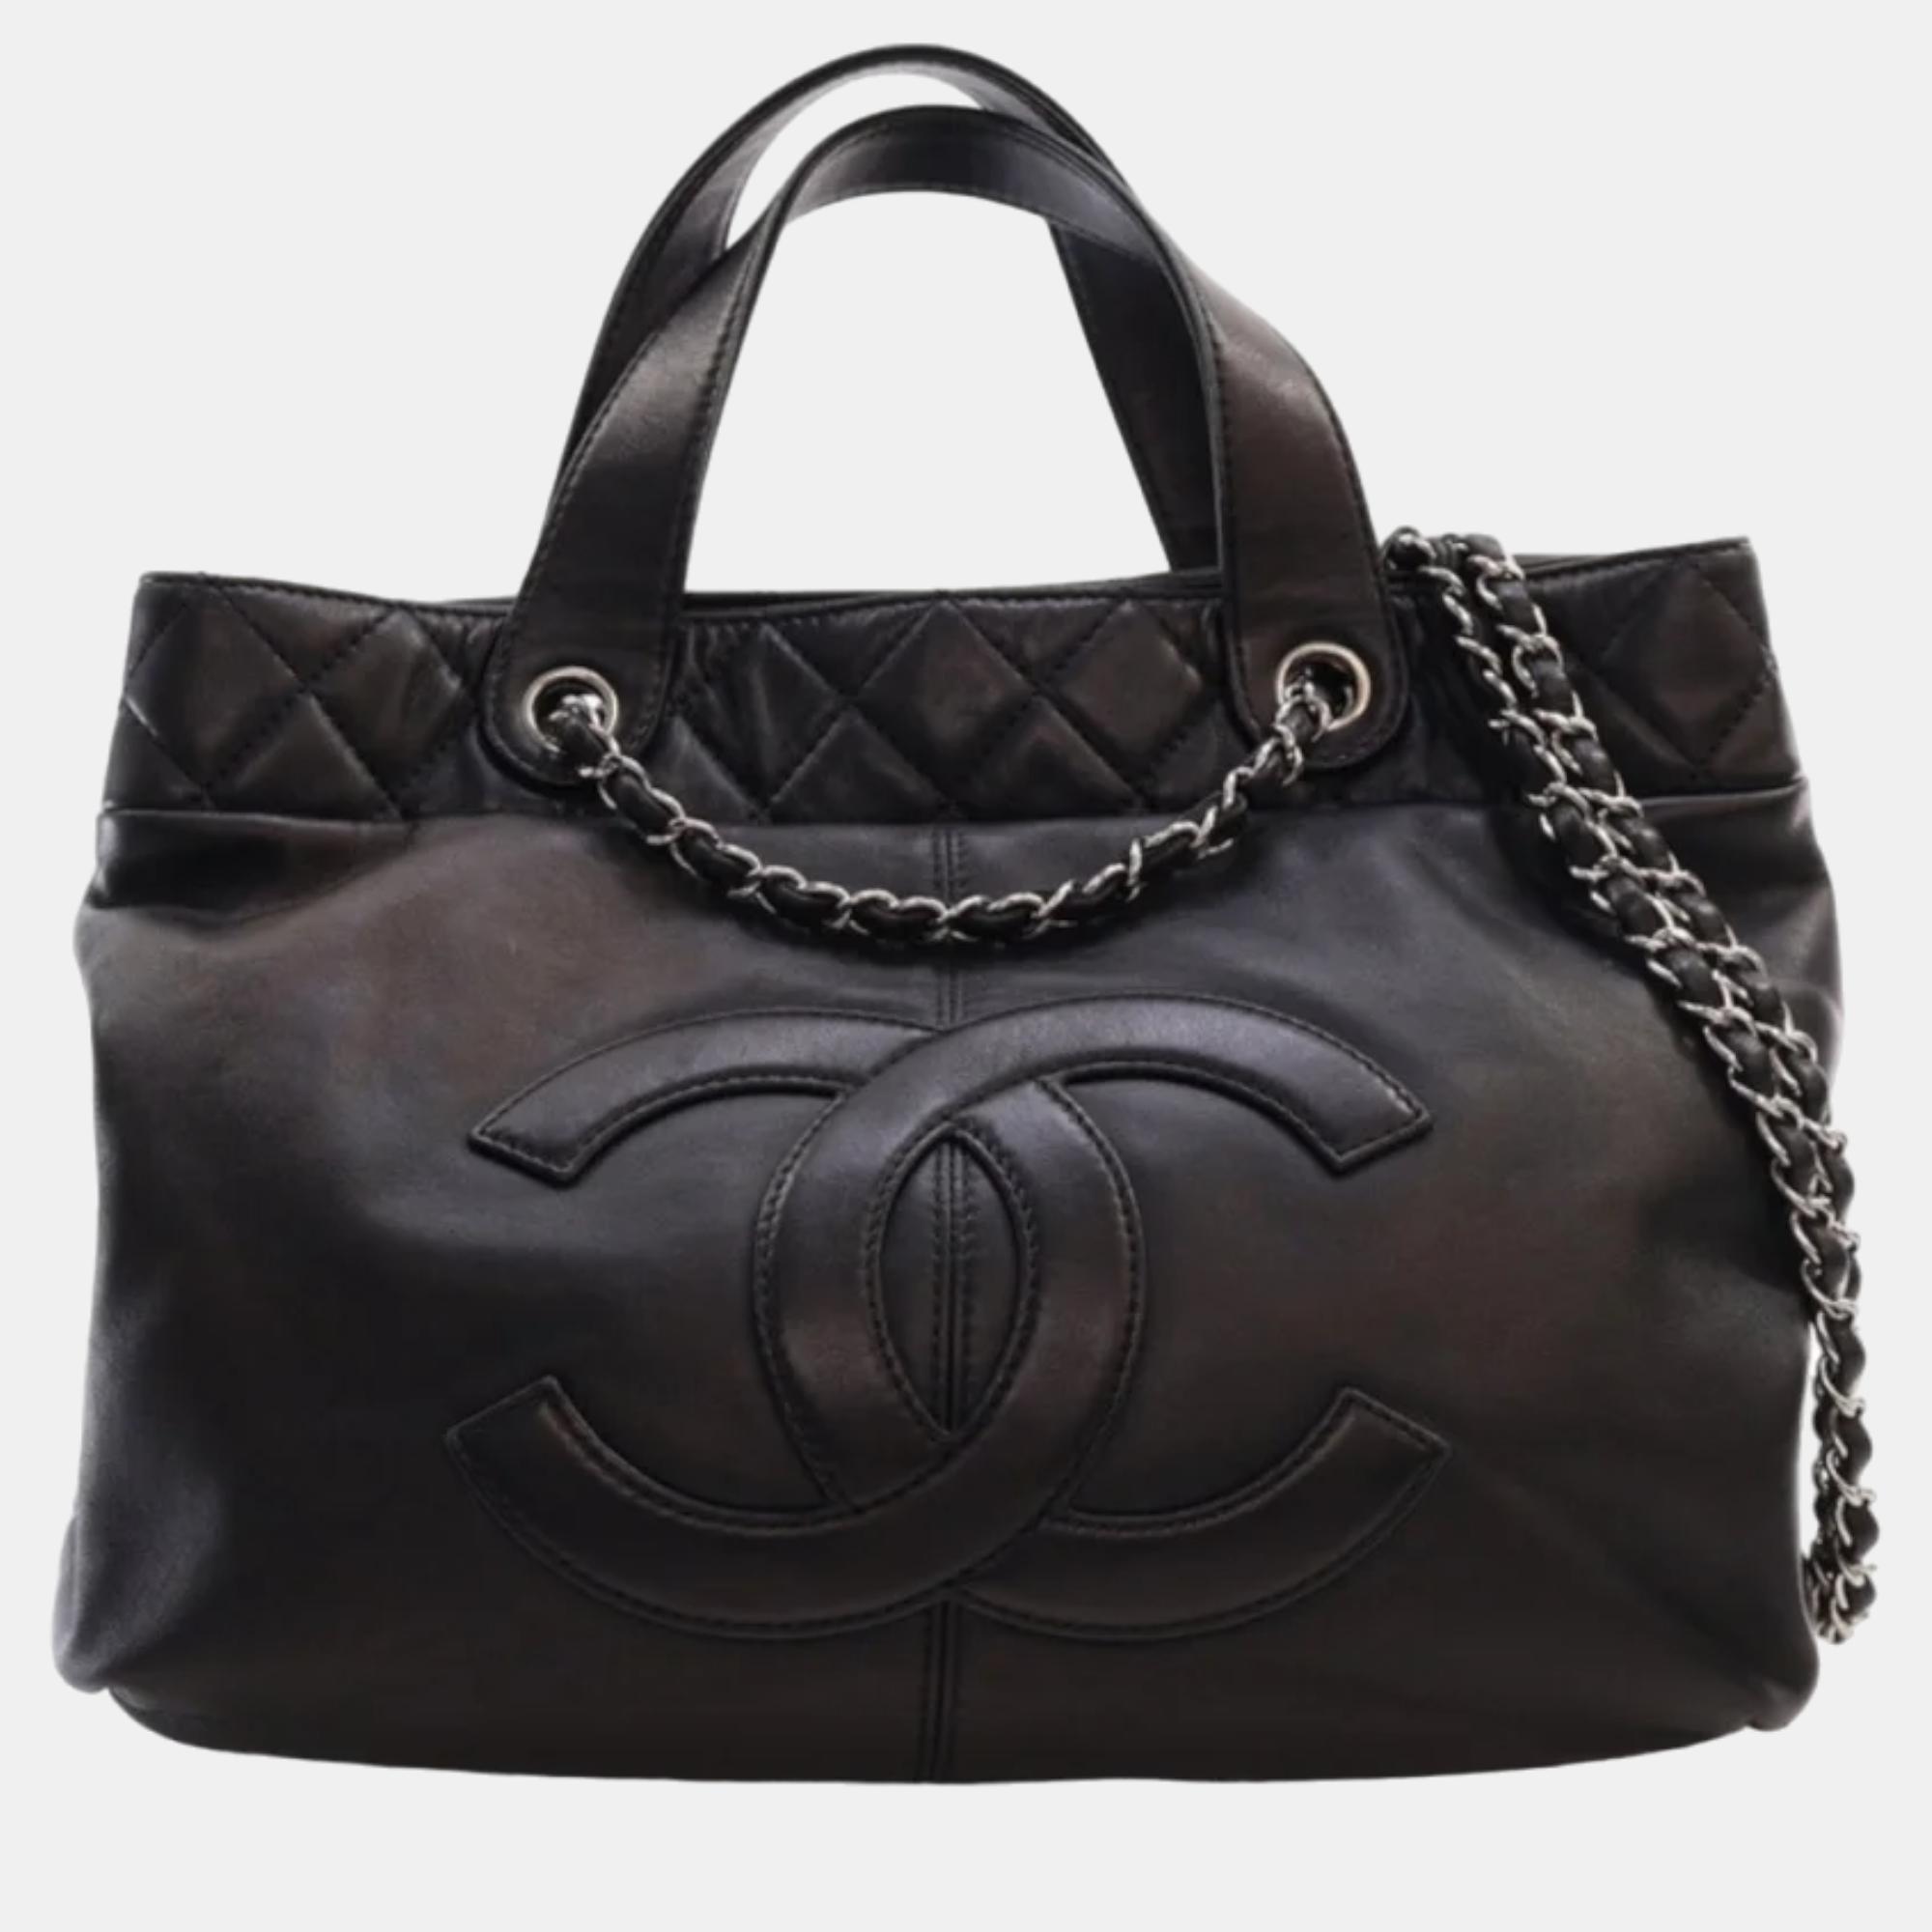 Chanel black leather large trianon shopping tote bag